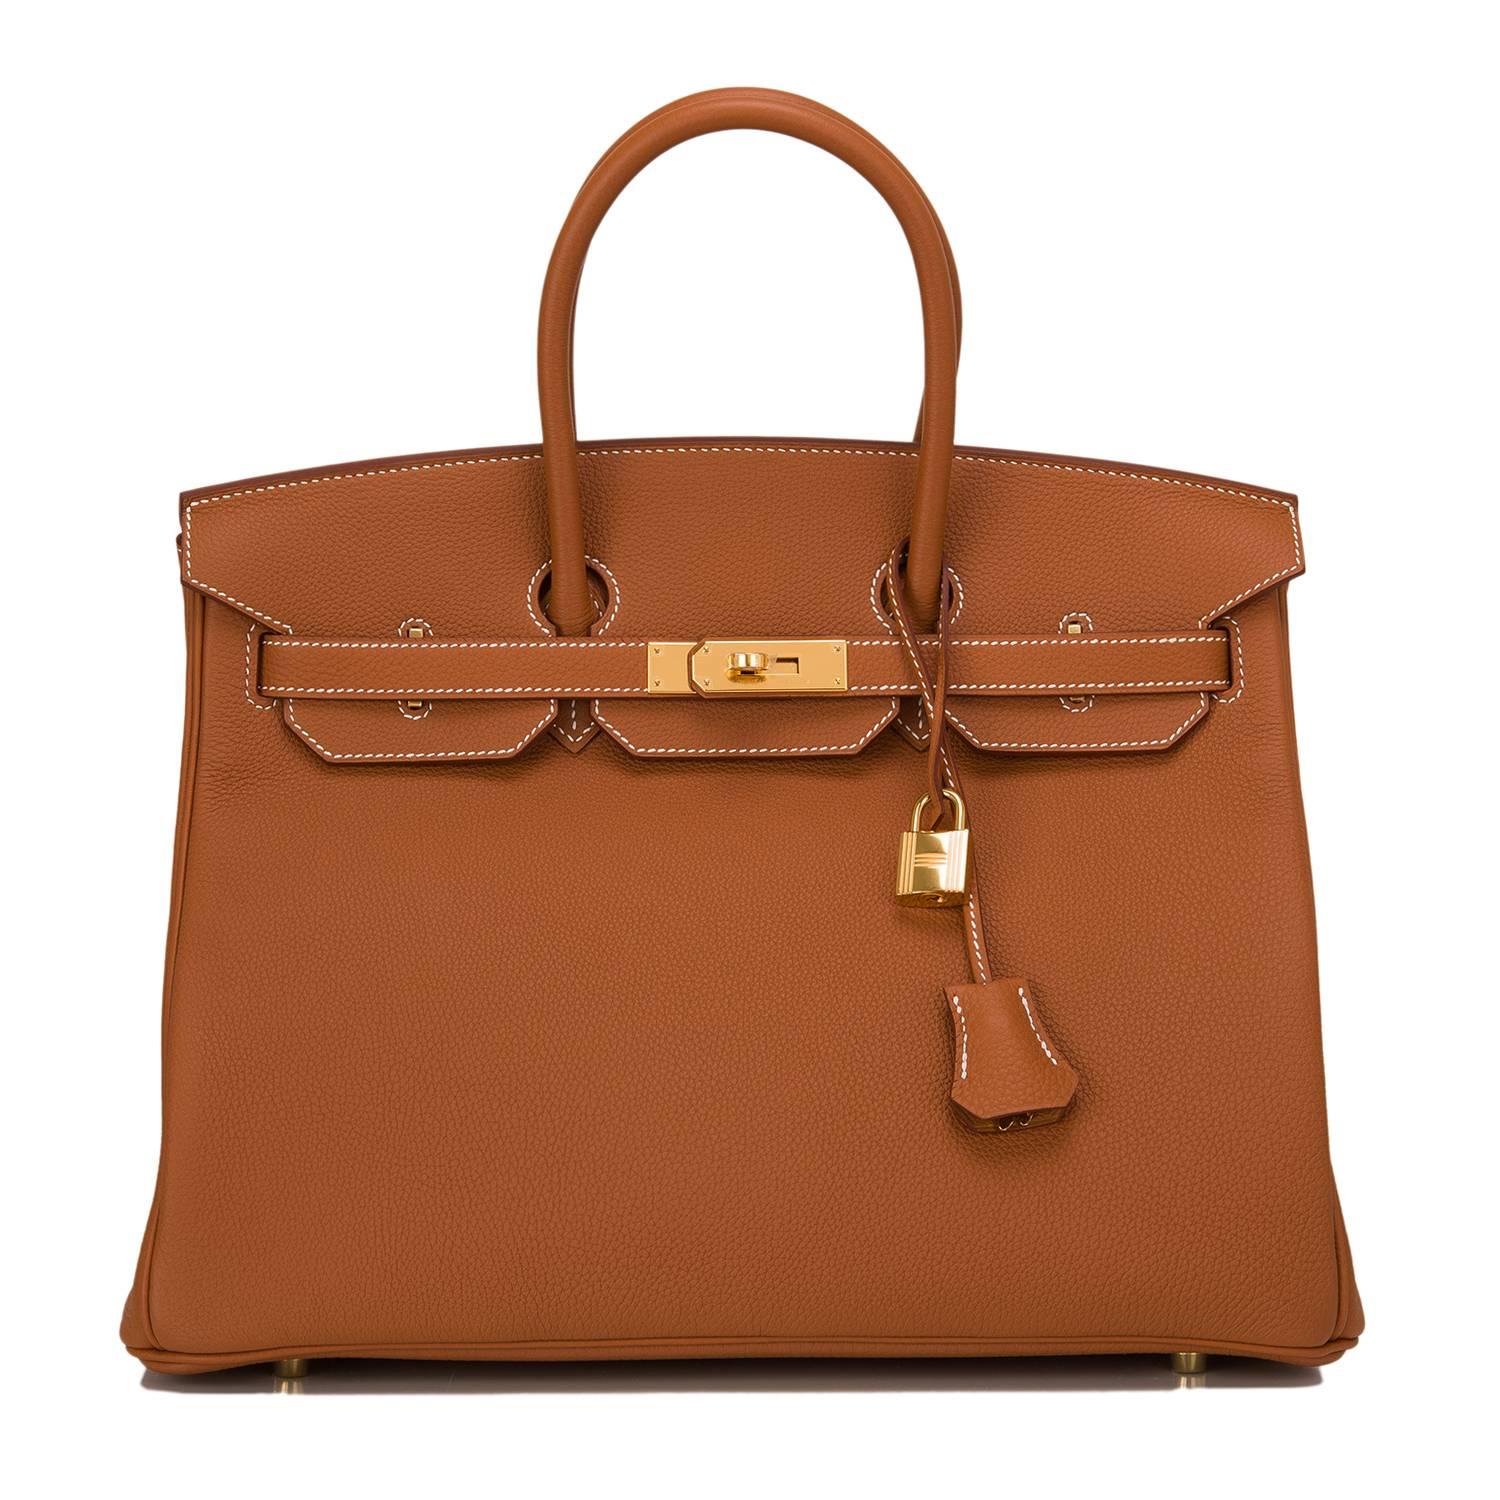 Hermes Gold Birkin 35cm of togo leather with gold hardware.

This Birkin has white contrast stitching, a front toggle closure, a clochette with lock and two keys, and double rolled handles.

The interior is lined with Gold chevre and has one zip